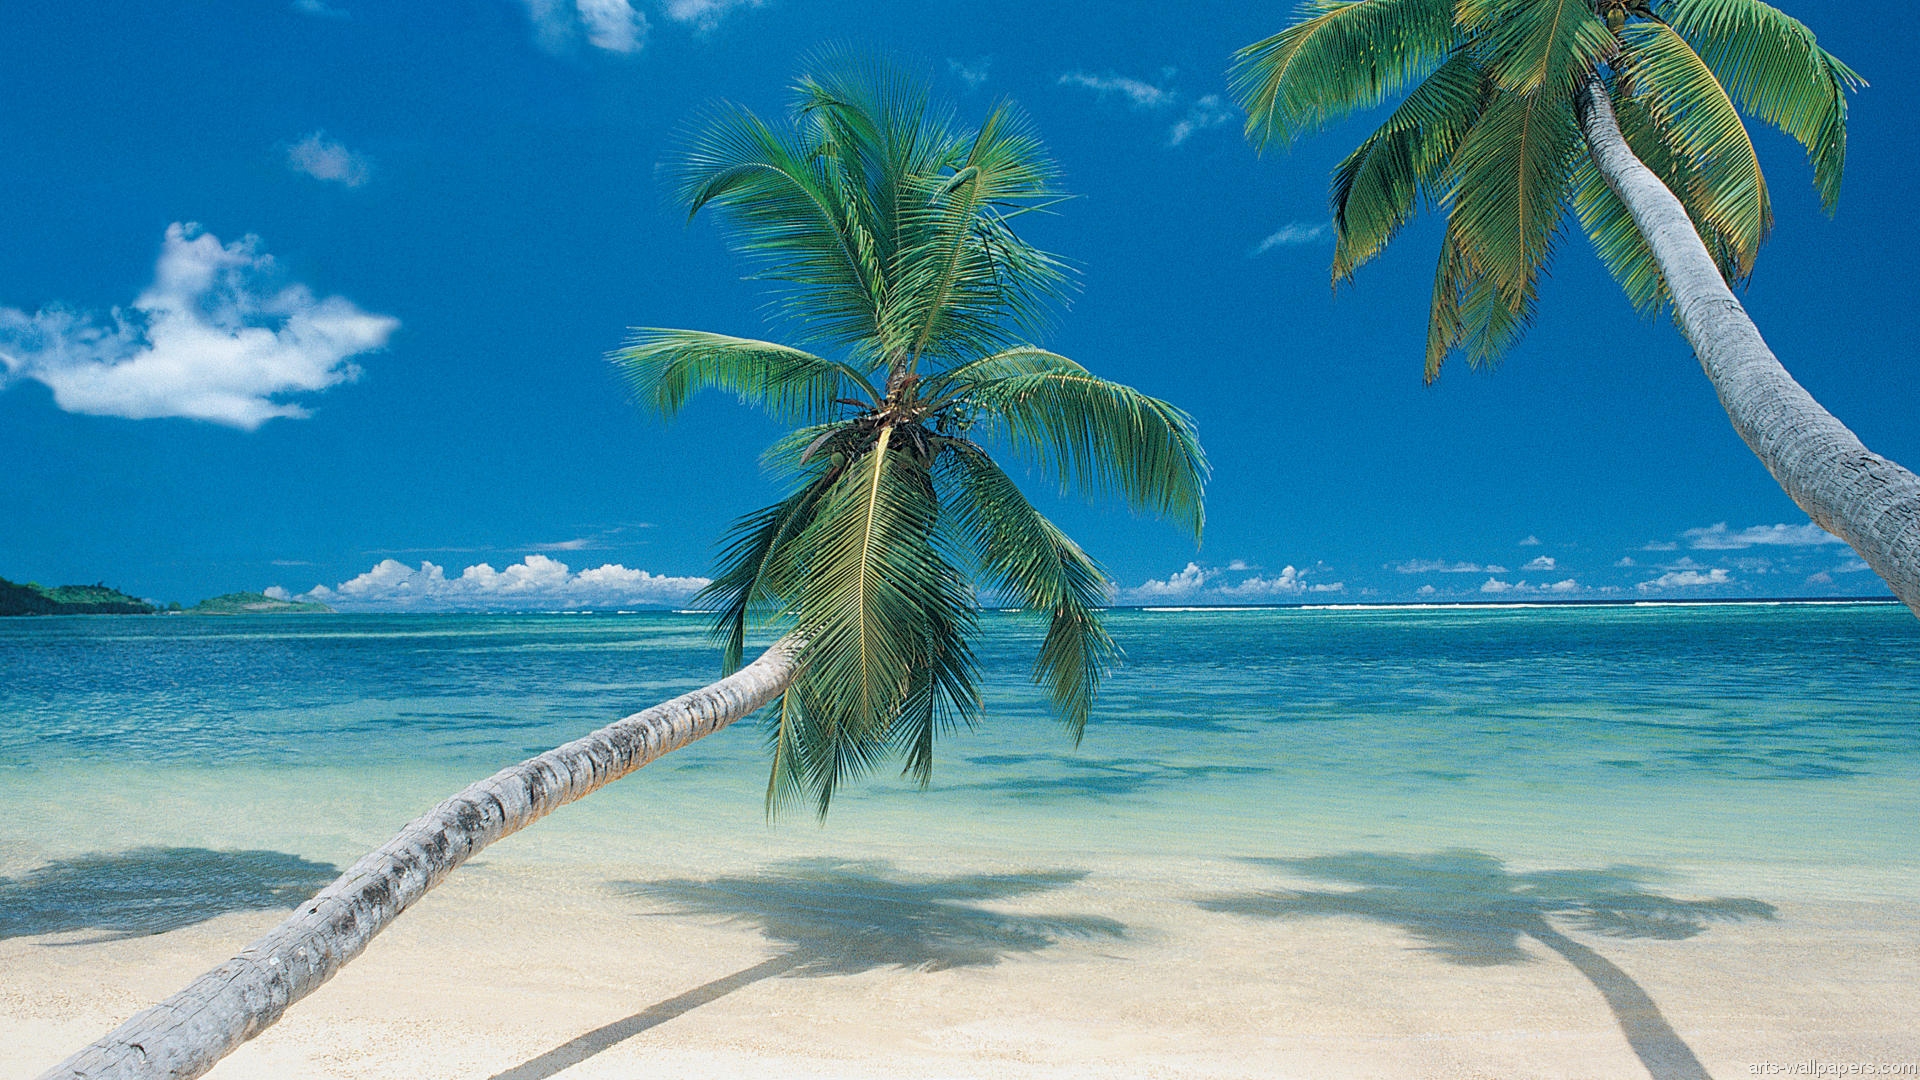  tropicaltropical paradise wallpaper wallpapers free wallpapers